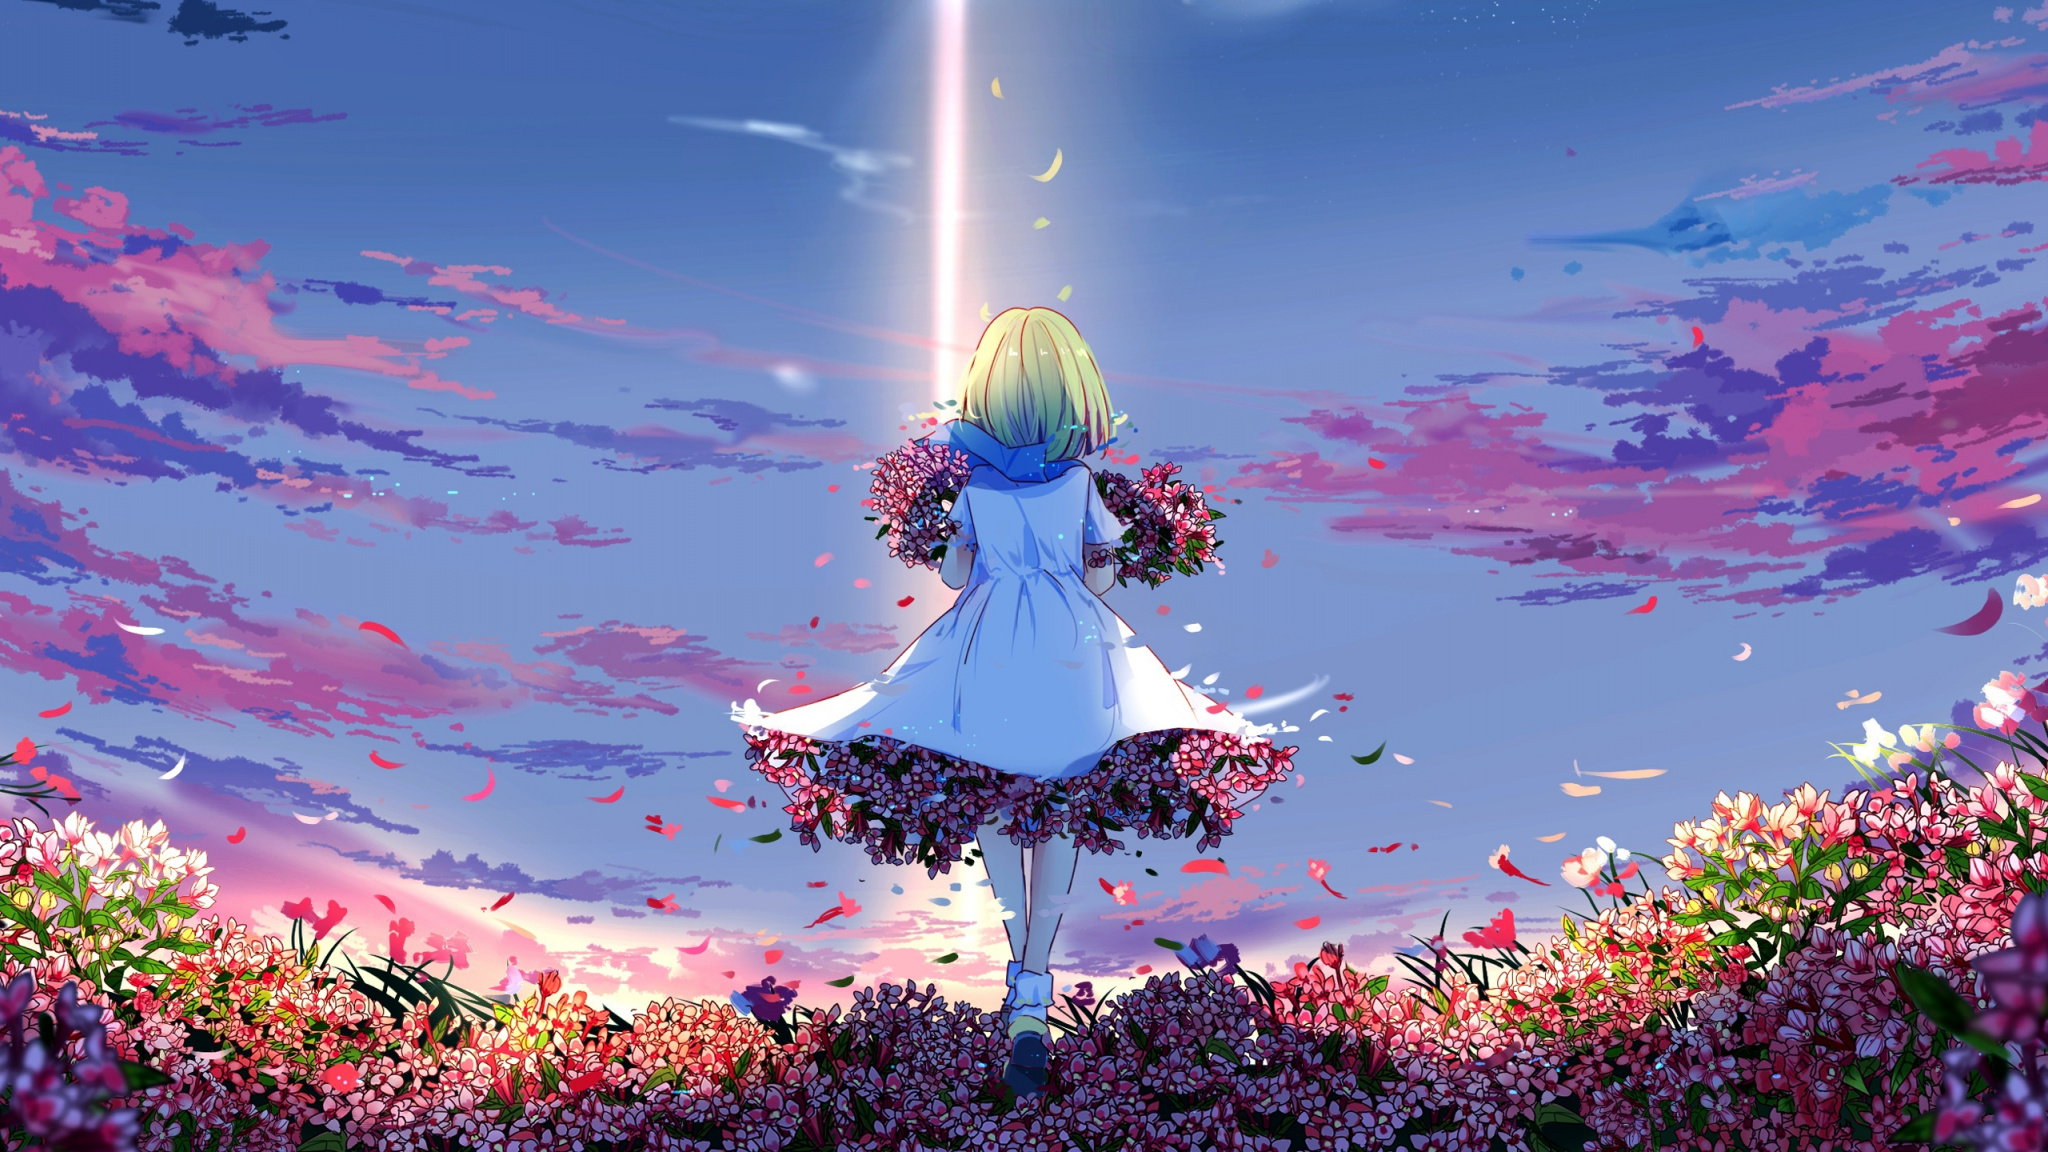 Download Anime girl, spring, flowers, girly, outdoor wallpaper, 2048x Dual Wide, Widescreen